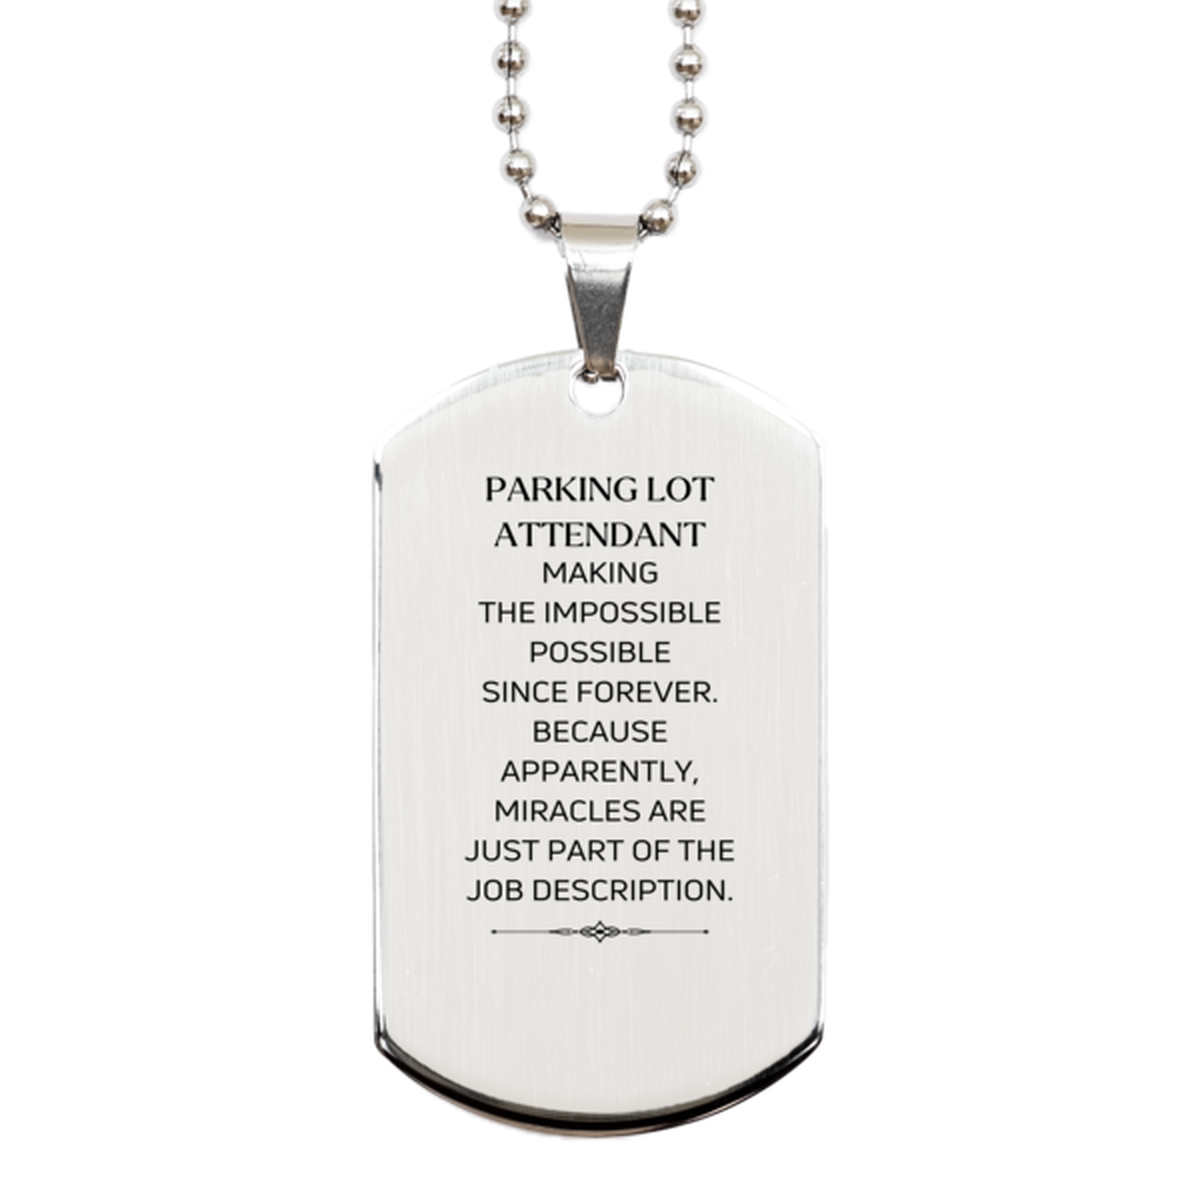 Funny Parking Lot Attendant Gifts, Miracles are just part of the job description, Inspirational Birthday Silver Dog Tag For Parking Lot Attendant, Men, Women, Coworkers, Friends, Boss